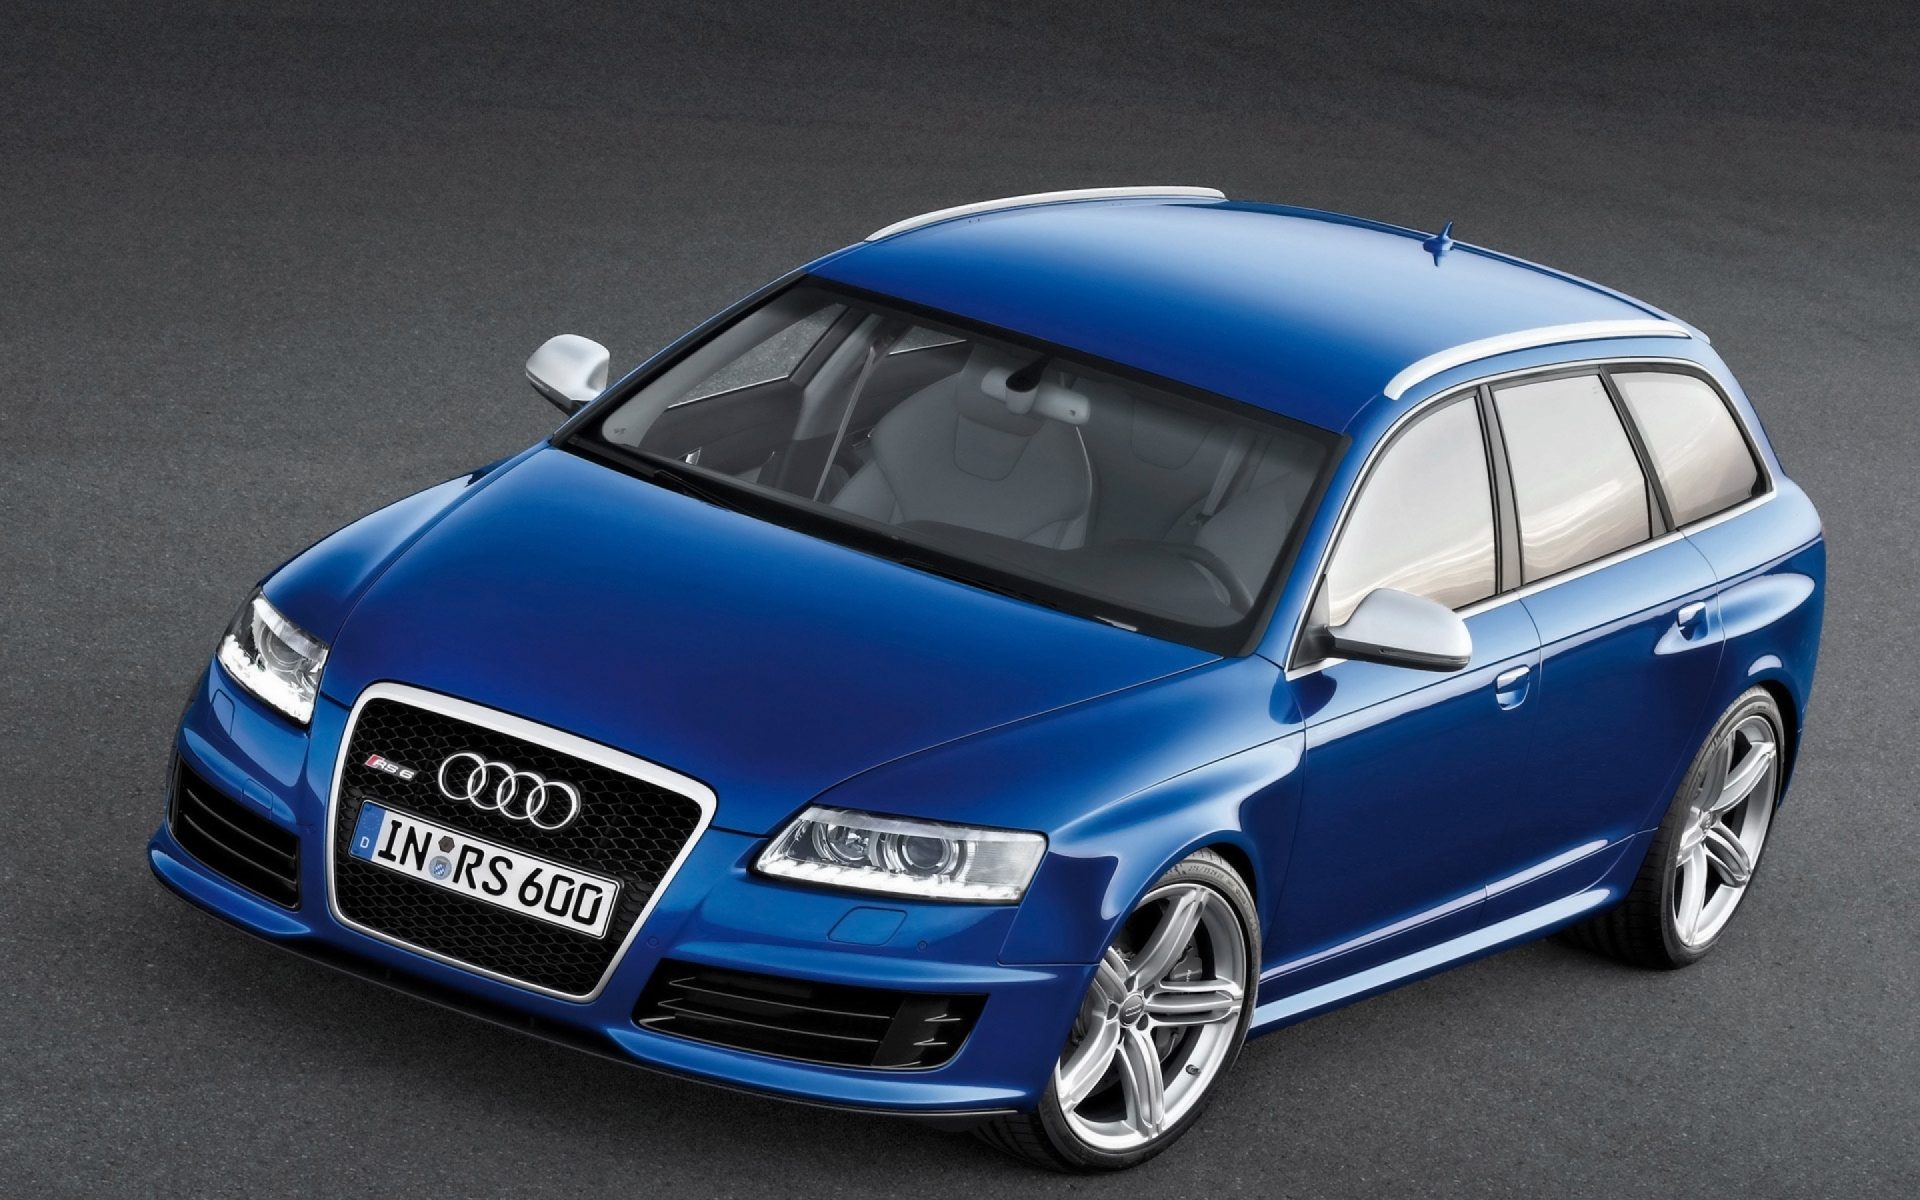 Audi Rs6 Avant Front And Side 2008 4k Hd Wallpaper - Audi Rs6 Avant 2008 , HD Wallpaper & Backgrounds